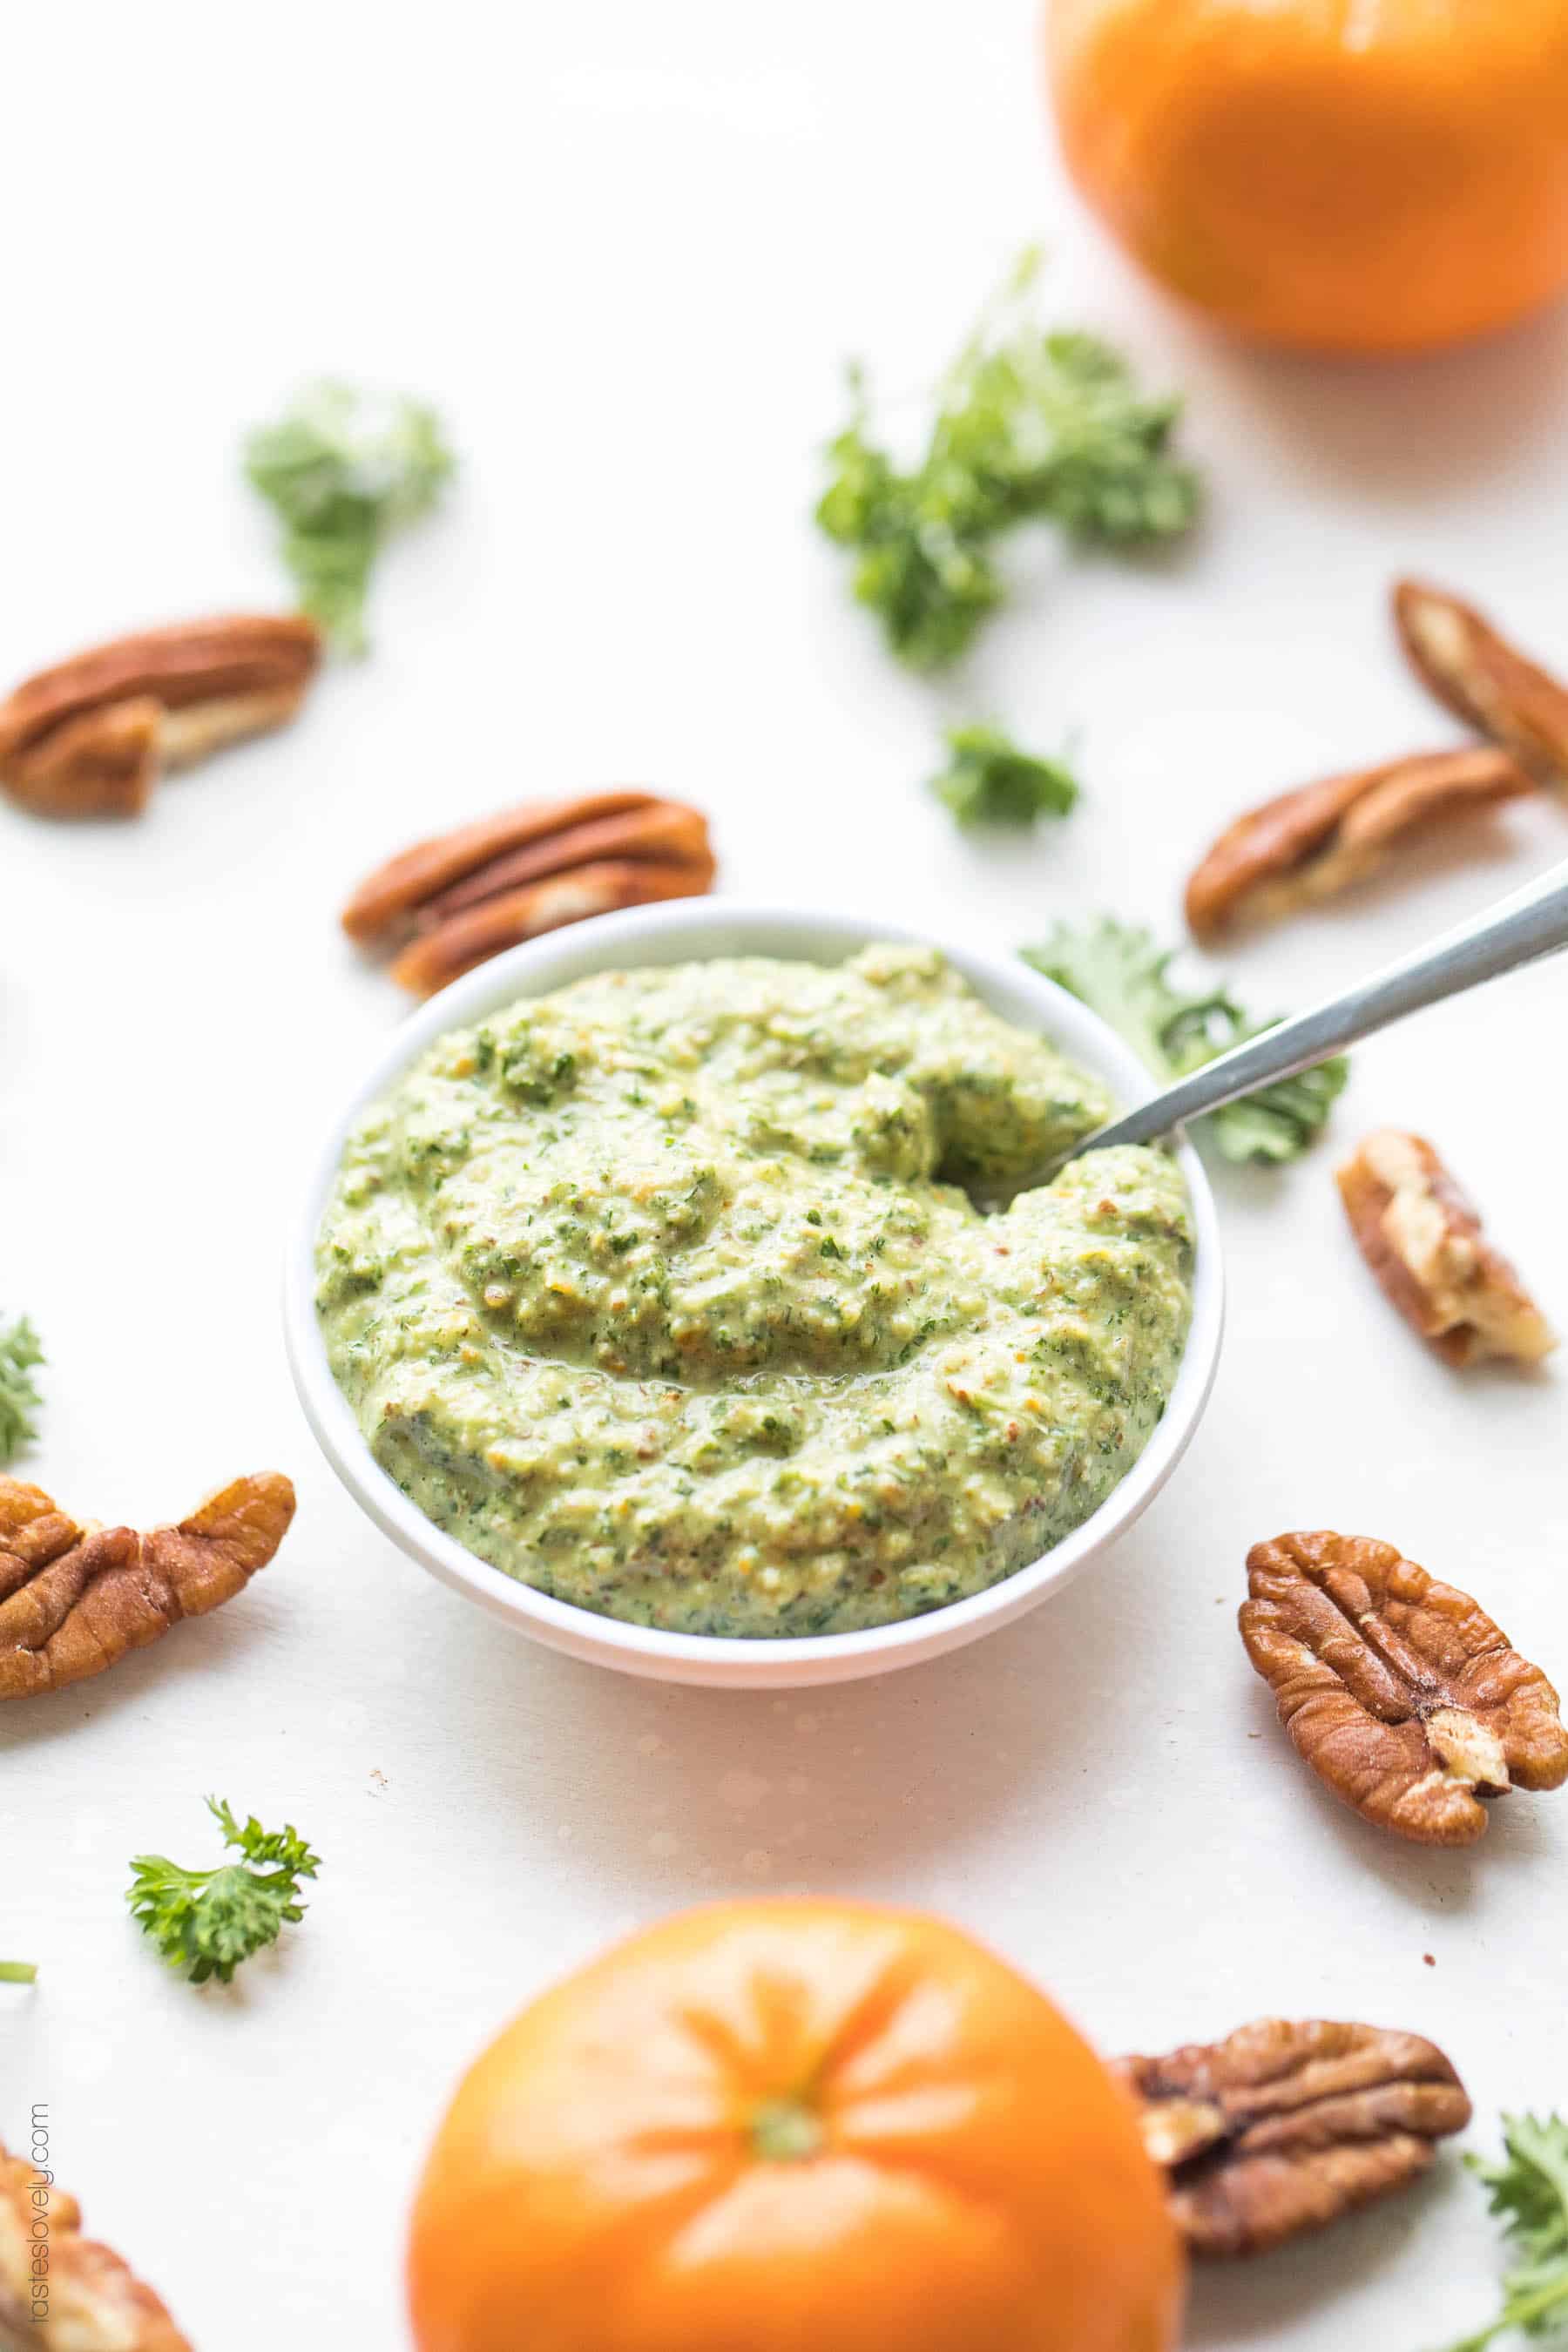 Paleo + Whole30 Orange Parsley Sauce - a citrusy and bright parsley sauce that is delicious on top of meat, fish and roasted vegetables. Gluten free, grain free, dairy free, sugar free, sugar free, clean eating, real food.